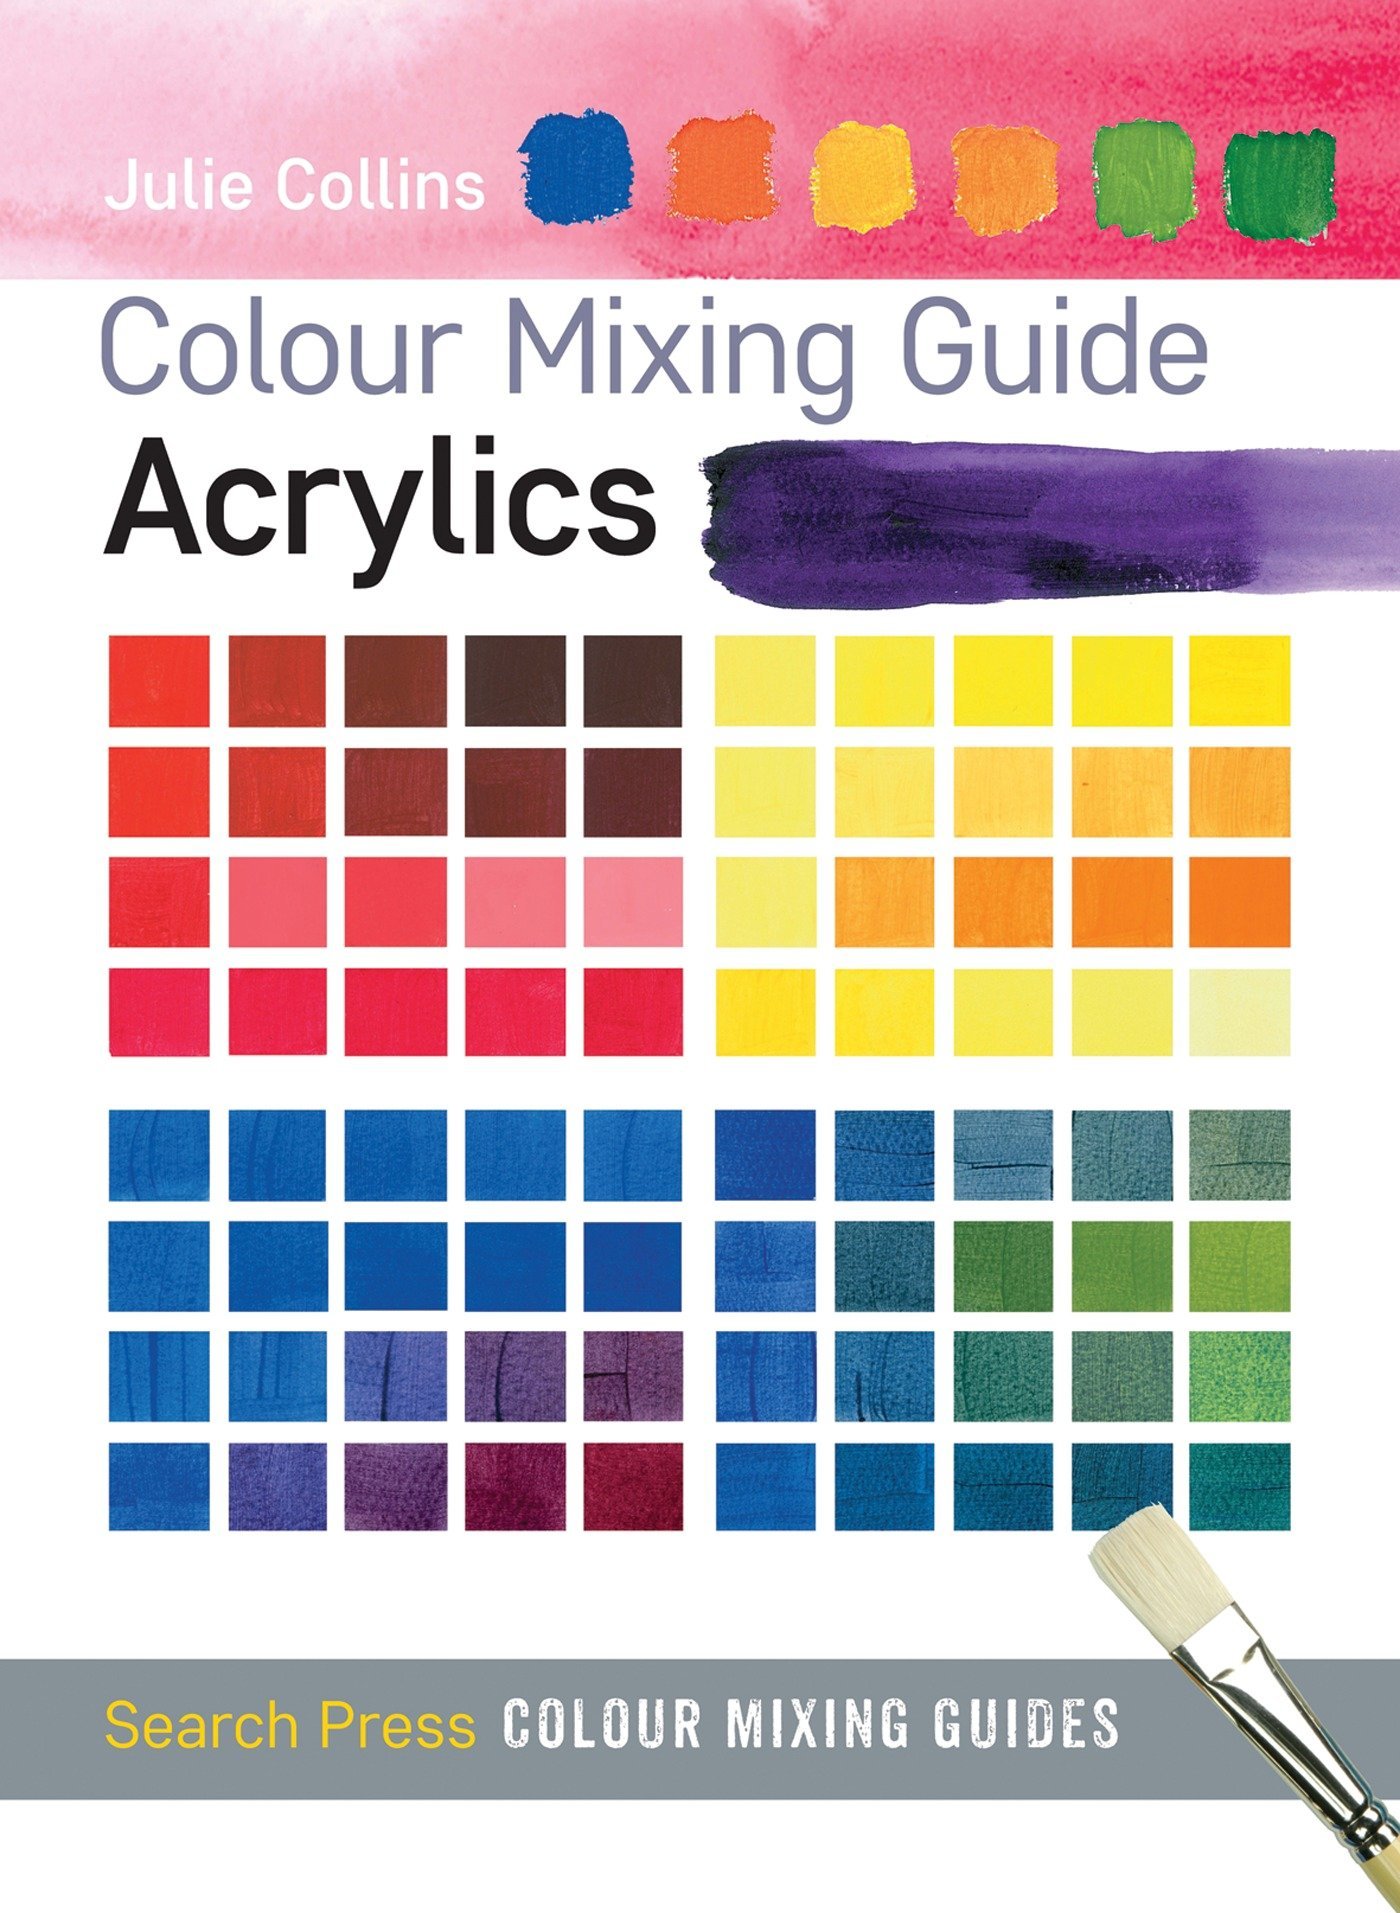 acrylic-color-mixing-chart-color-chart-for-mixing-acrylic-paint-color